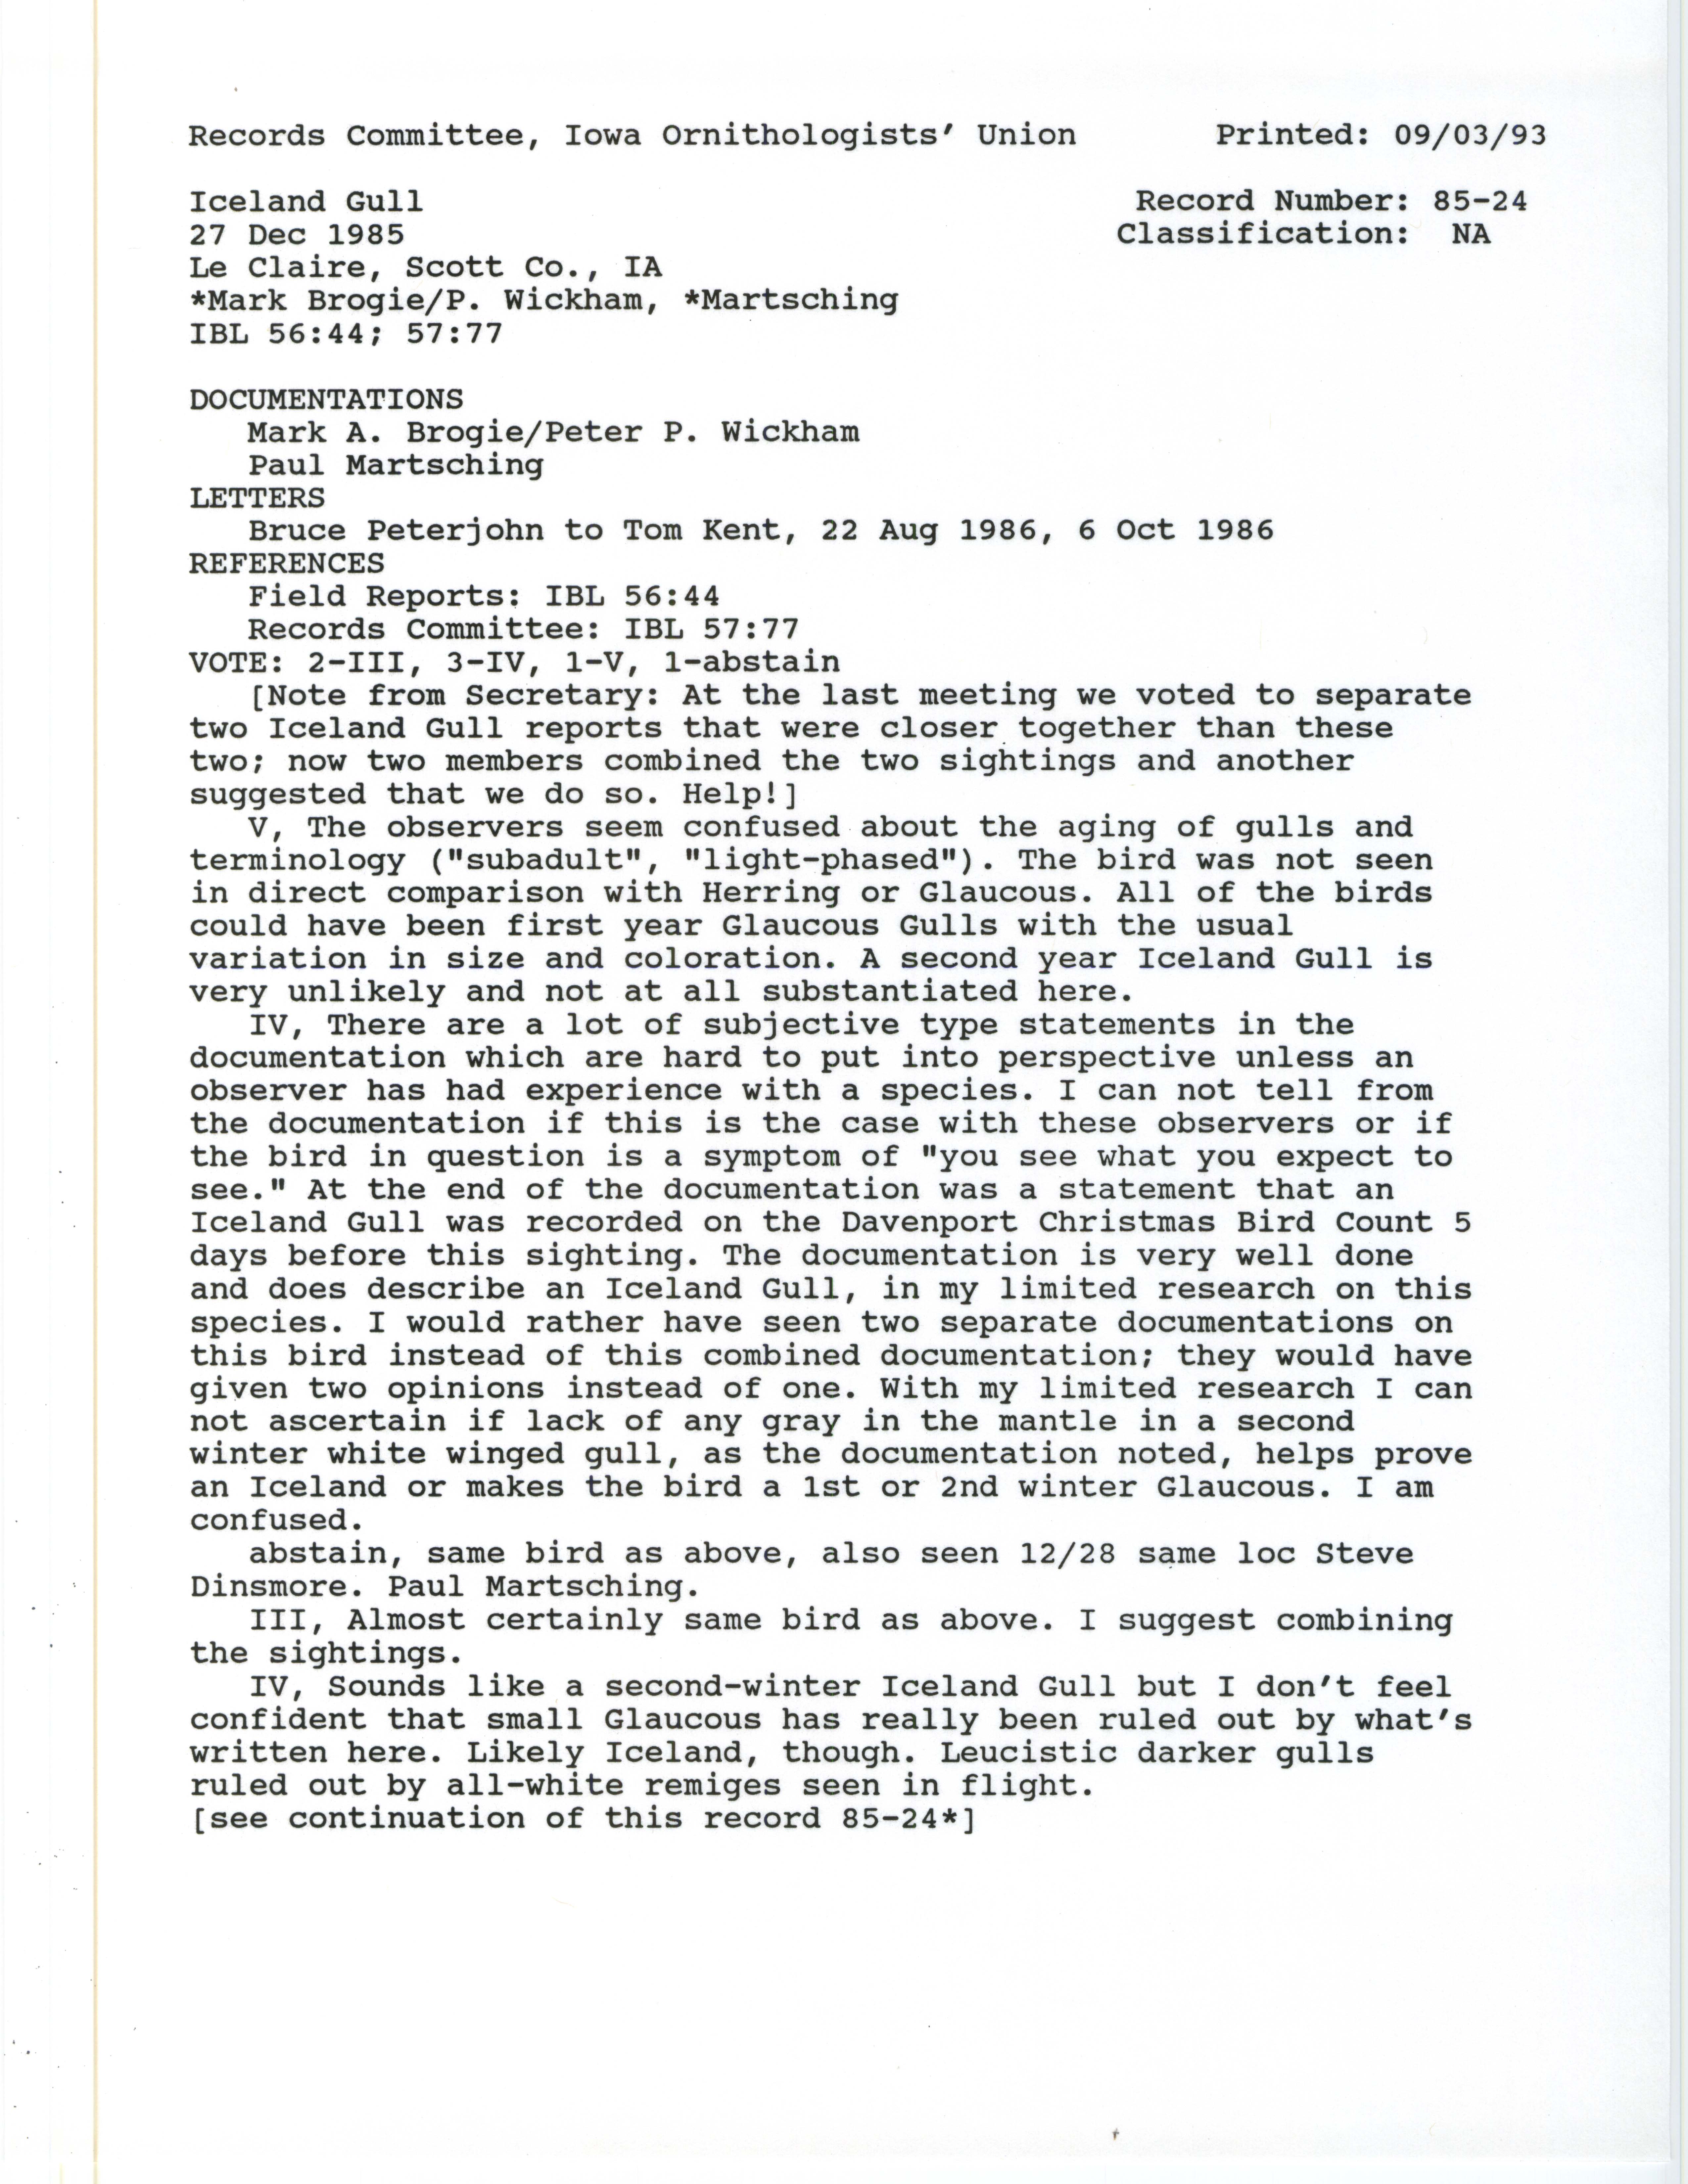 Records Committee review for rare bird sighting of Iceland Gull near Le Claire, 1985